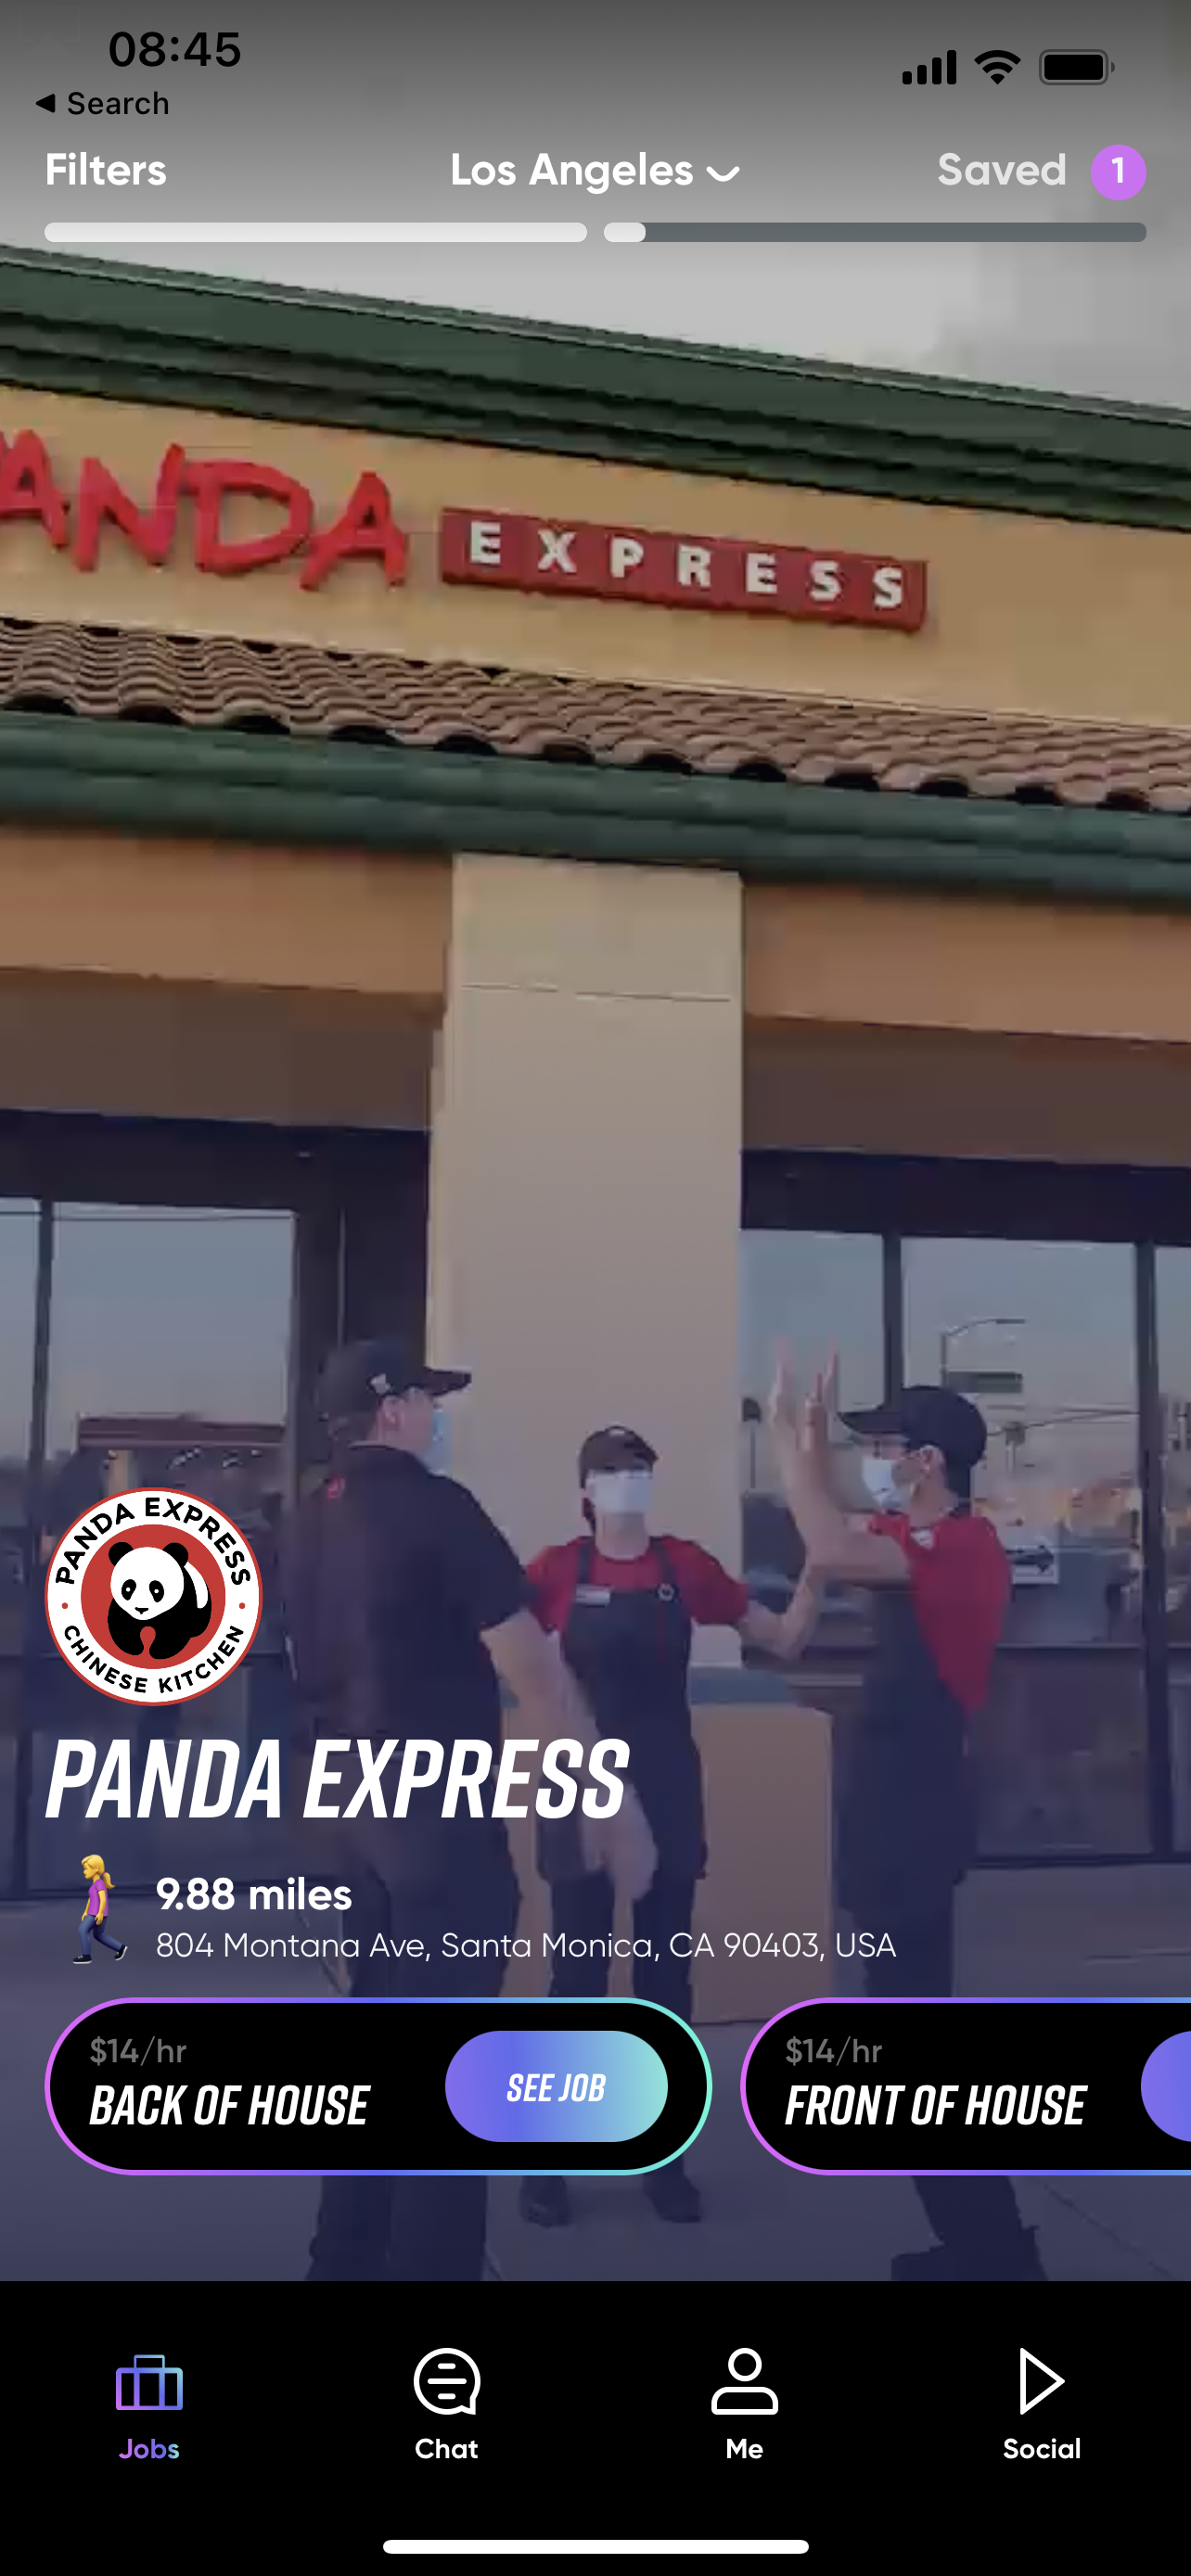 A screengrab showing the behind the scenes of what its like to work at Panda Express